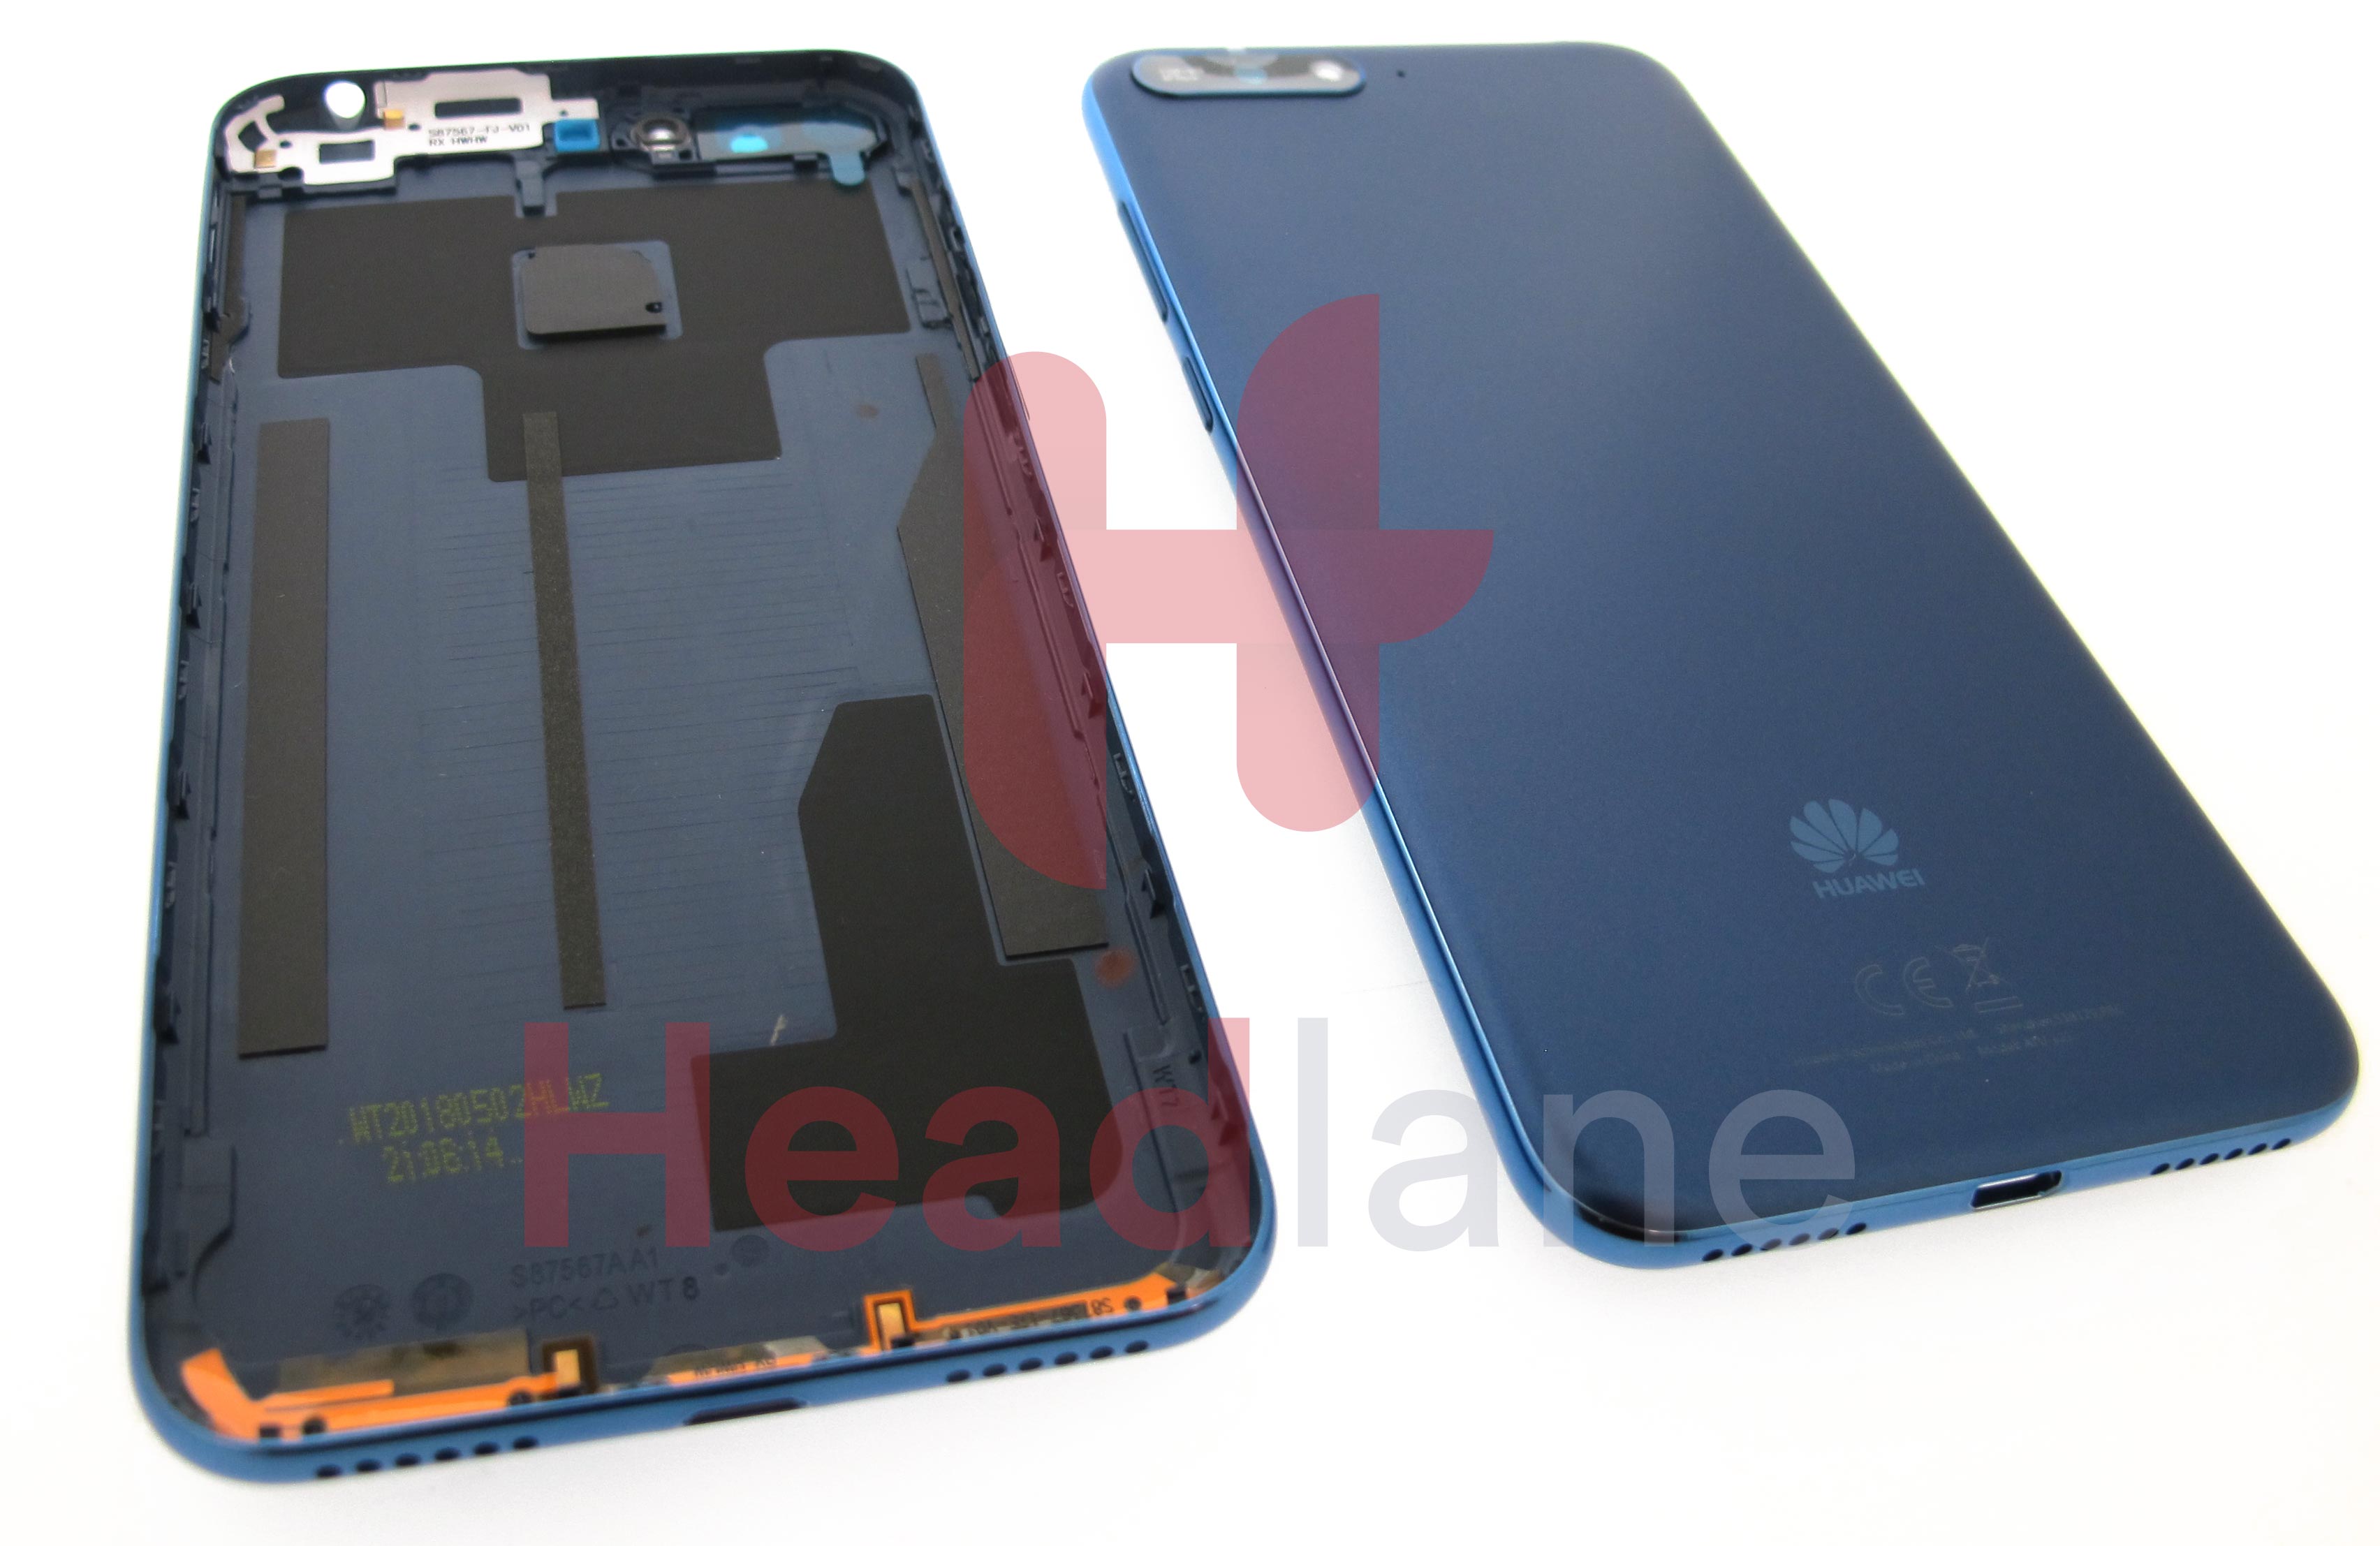 Huawei Y6 (2018) Battery / Back Cover - Blue